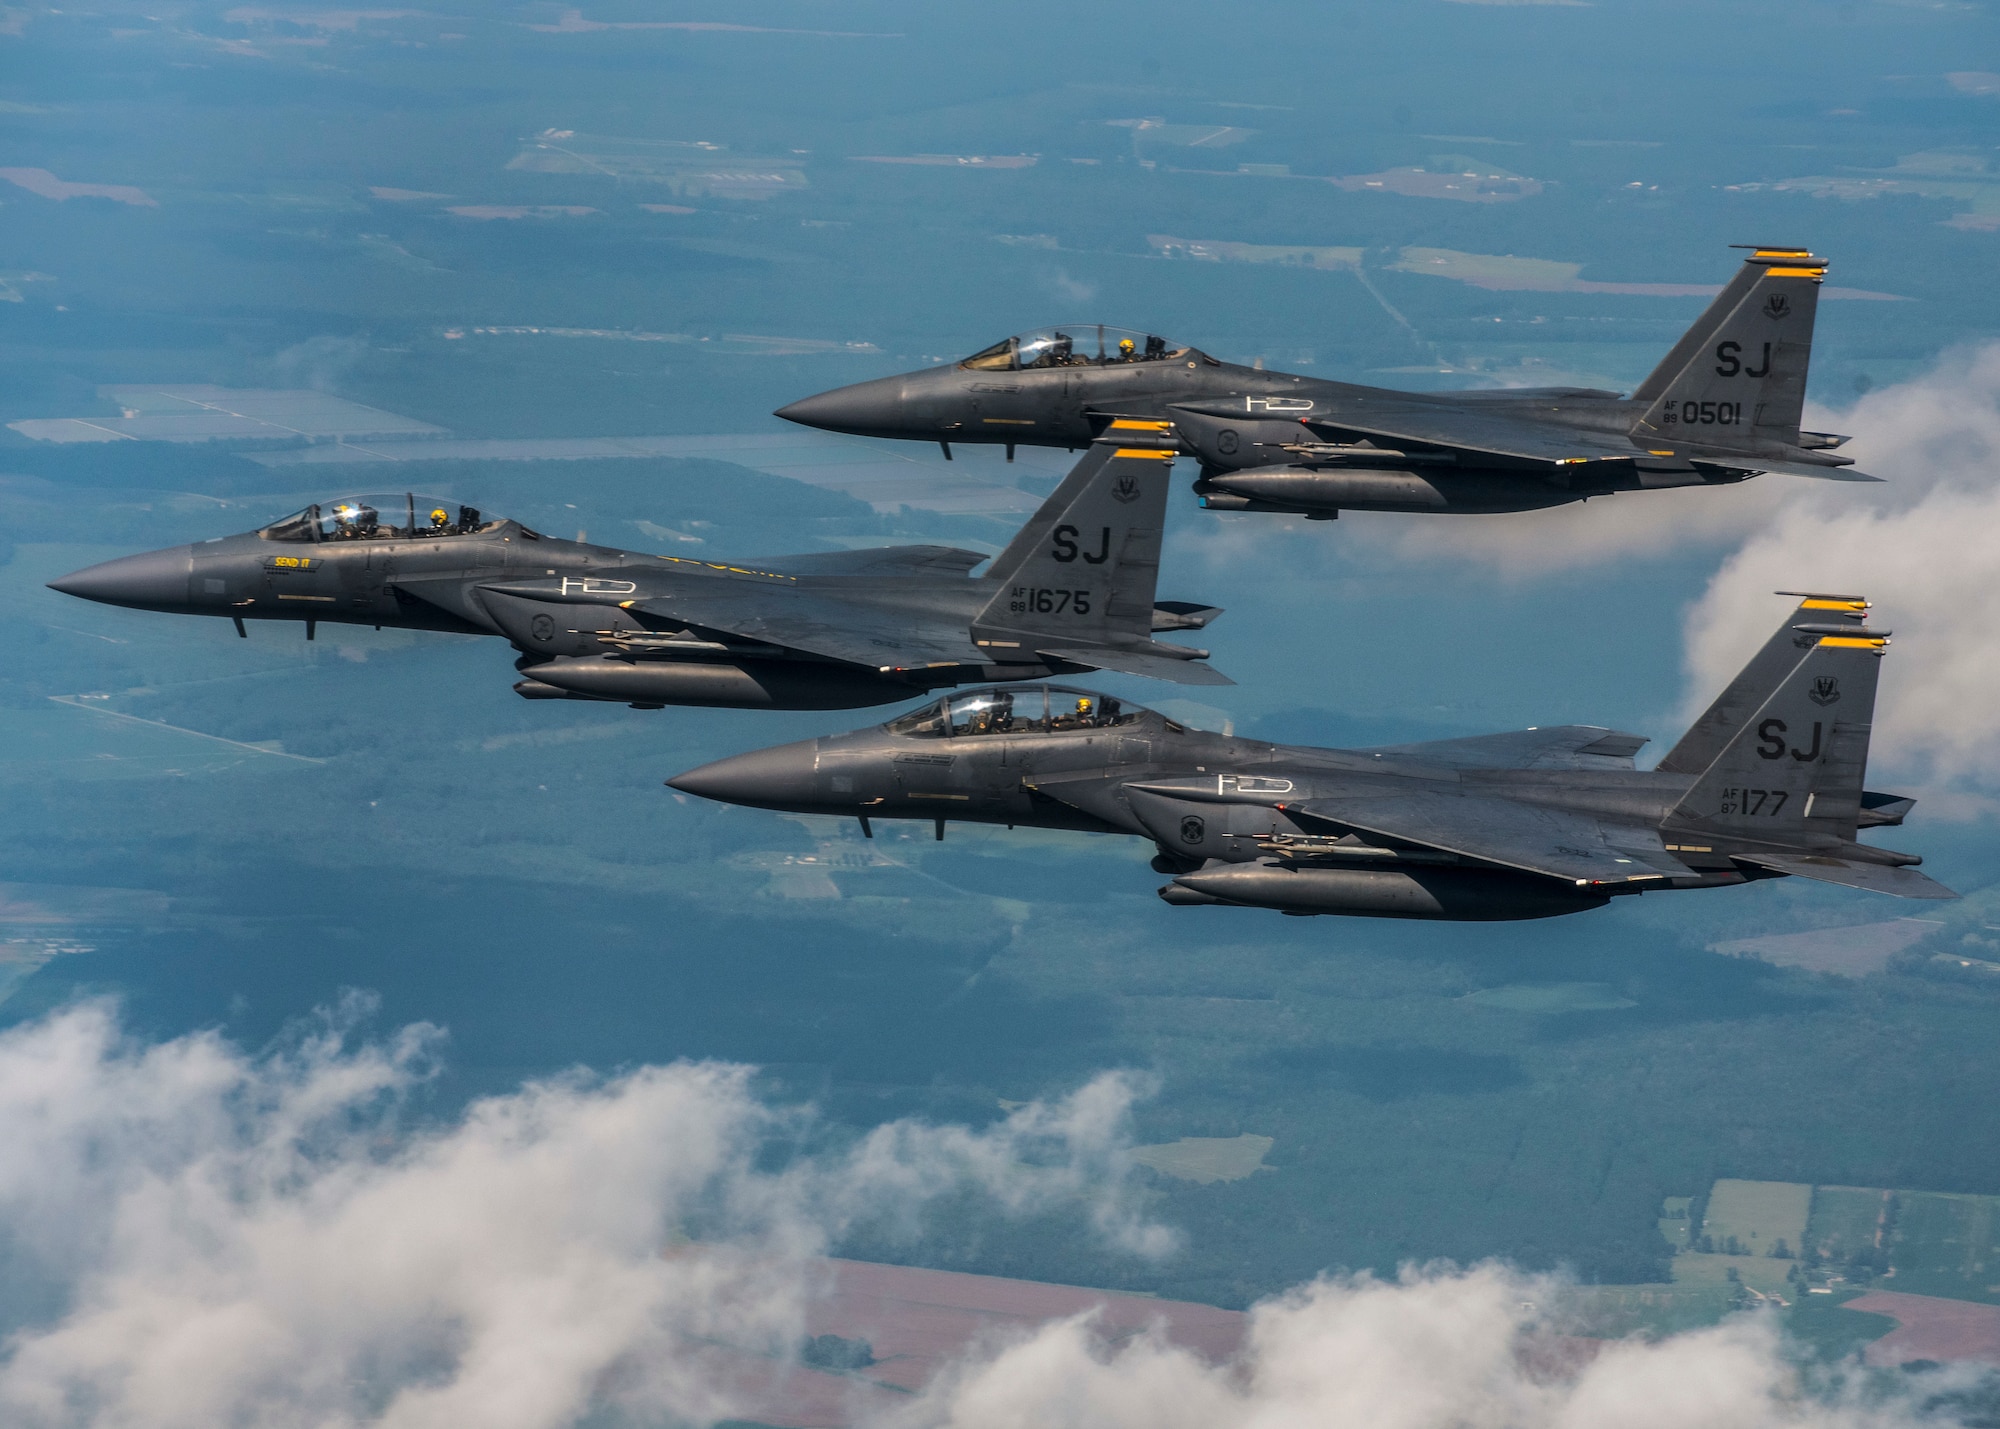 F-15E Strike Eagles from the 336th Fighter Squadron at Seymour Johnson Air Force Base fly in formation in the sky over North Carolina.